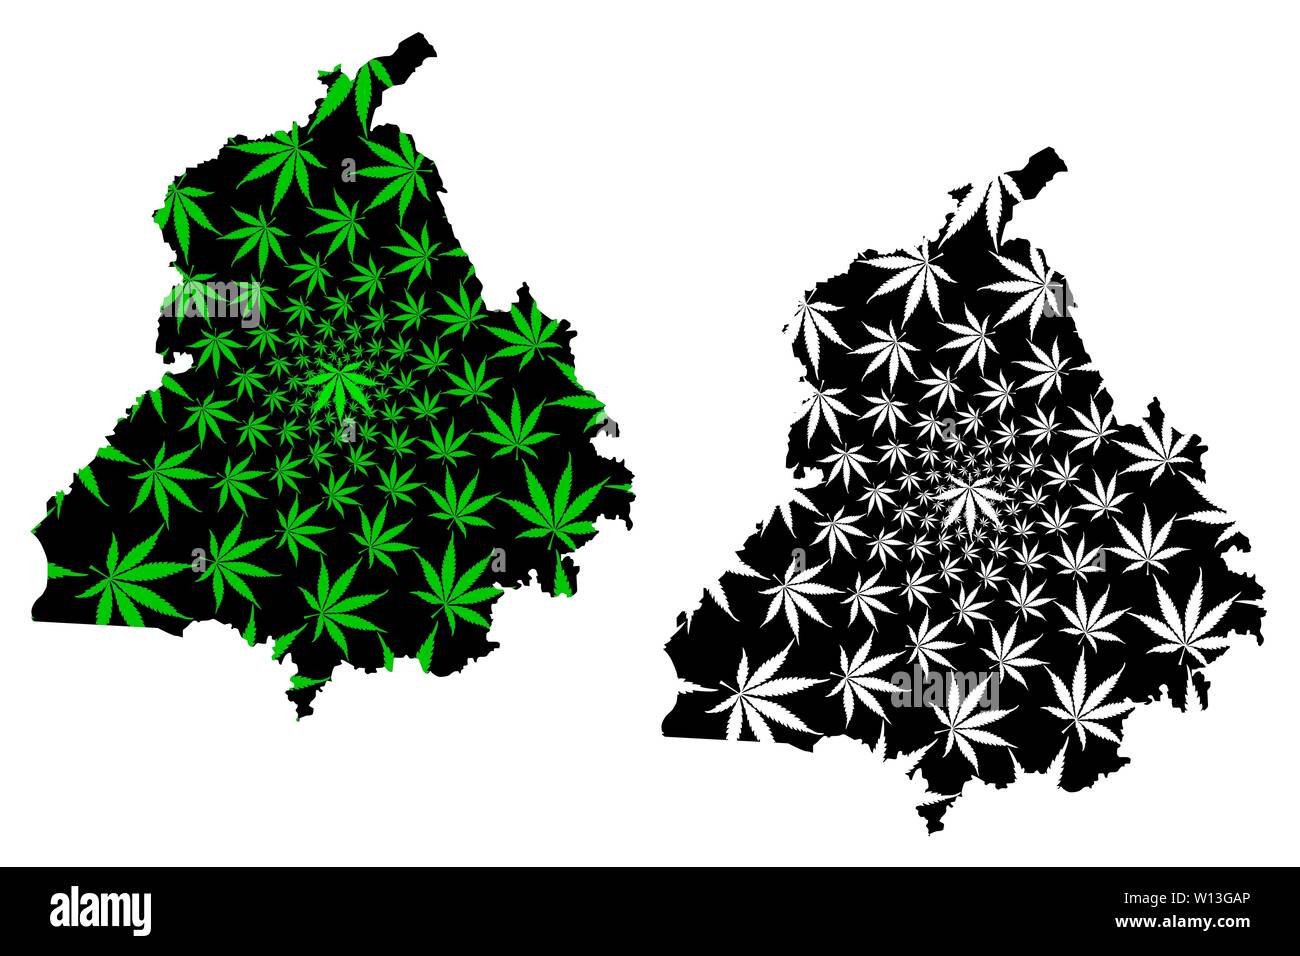 Punjab (States and union territories of India, Federated states, Republic of India) map is designed cannabis leaf green and black, Punjab state map ma Stock Vector